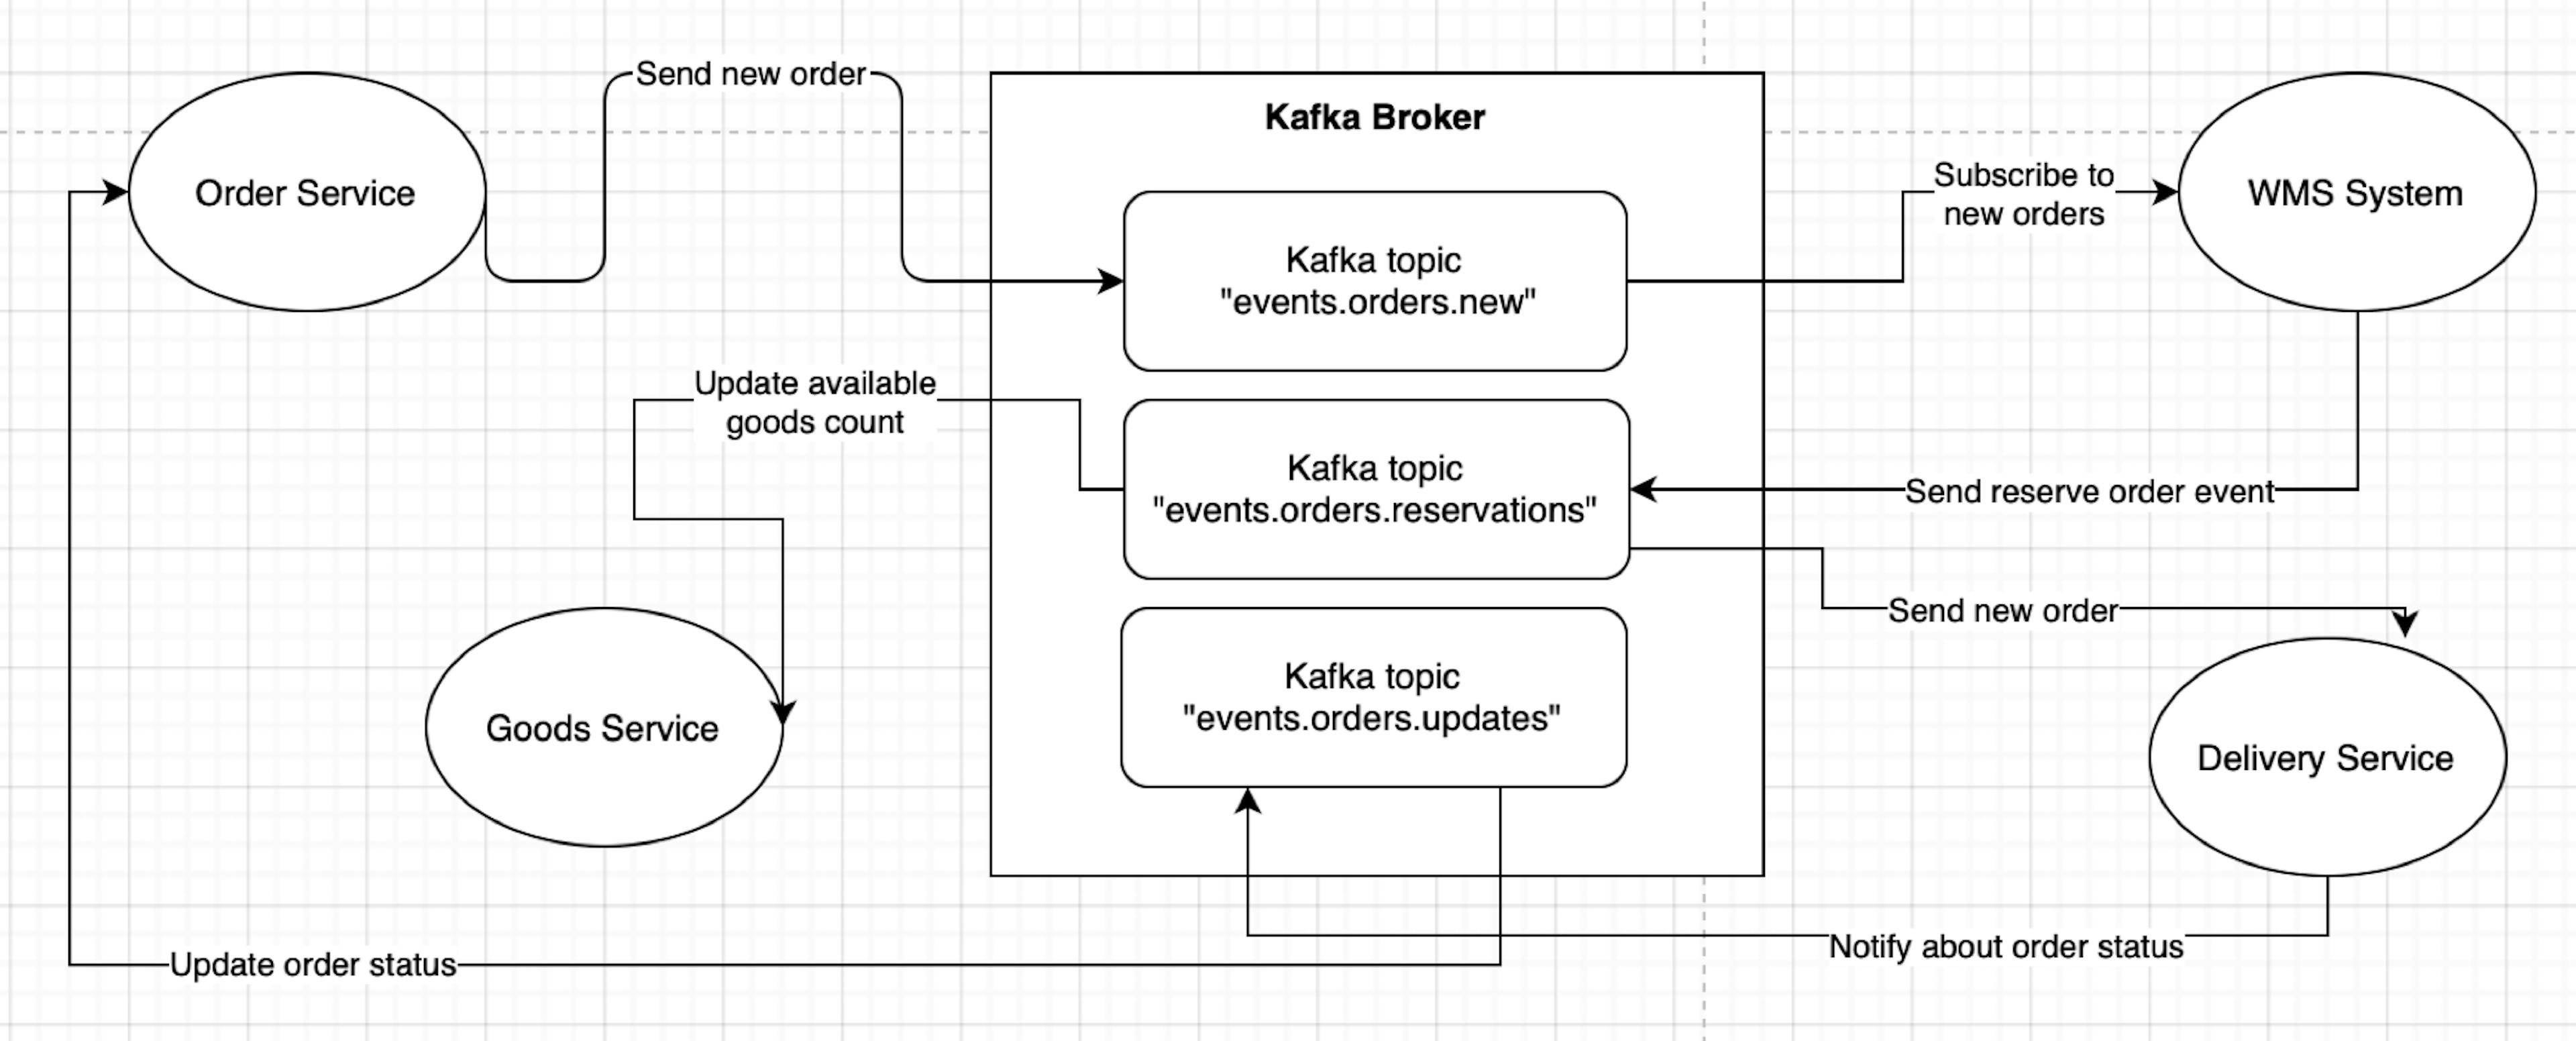 Integration between Order Service, Goods Service, Delivery Service, and Warehouse Management System using Event-Driven Architecture (EDA) and Kafka